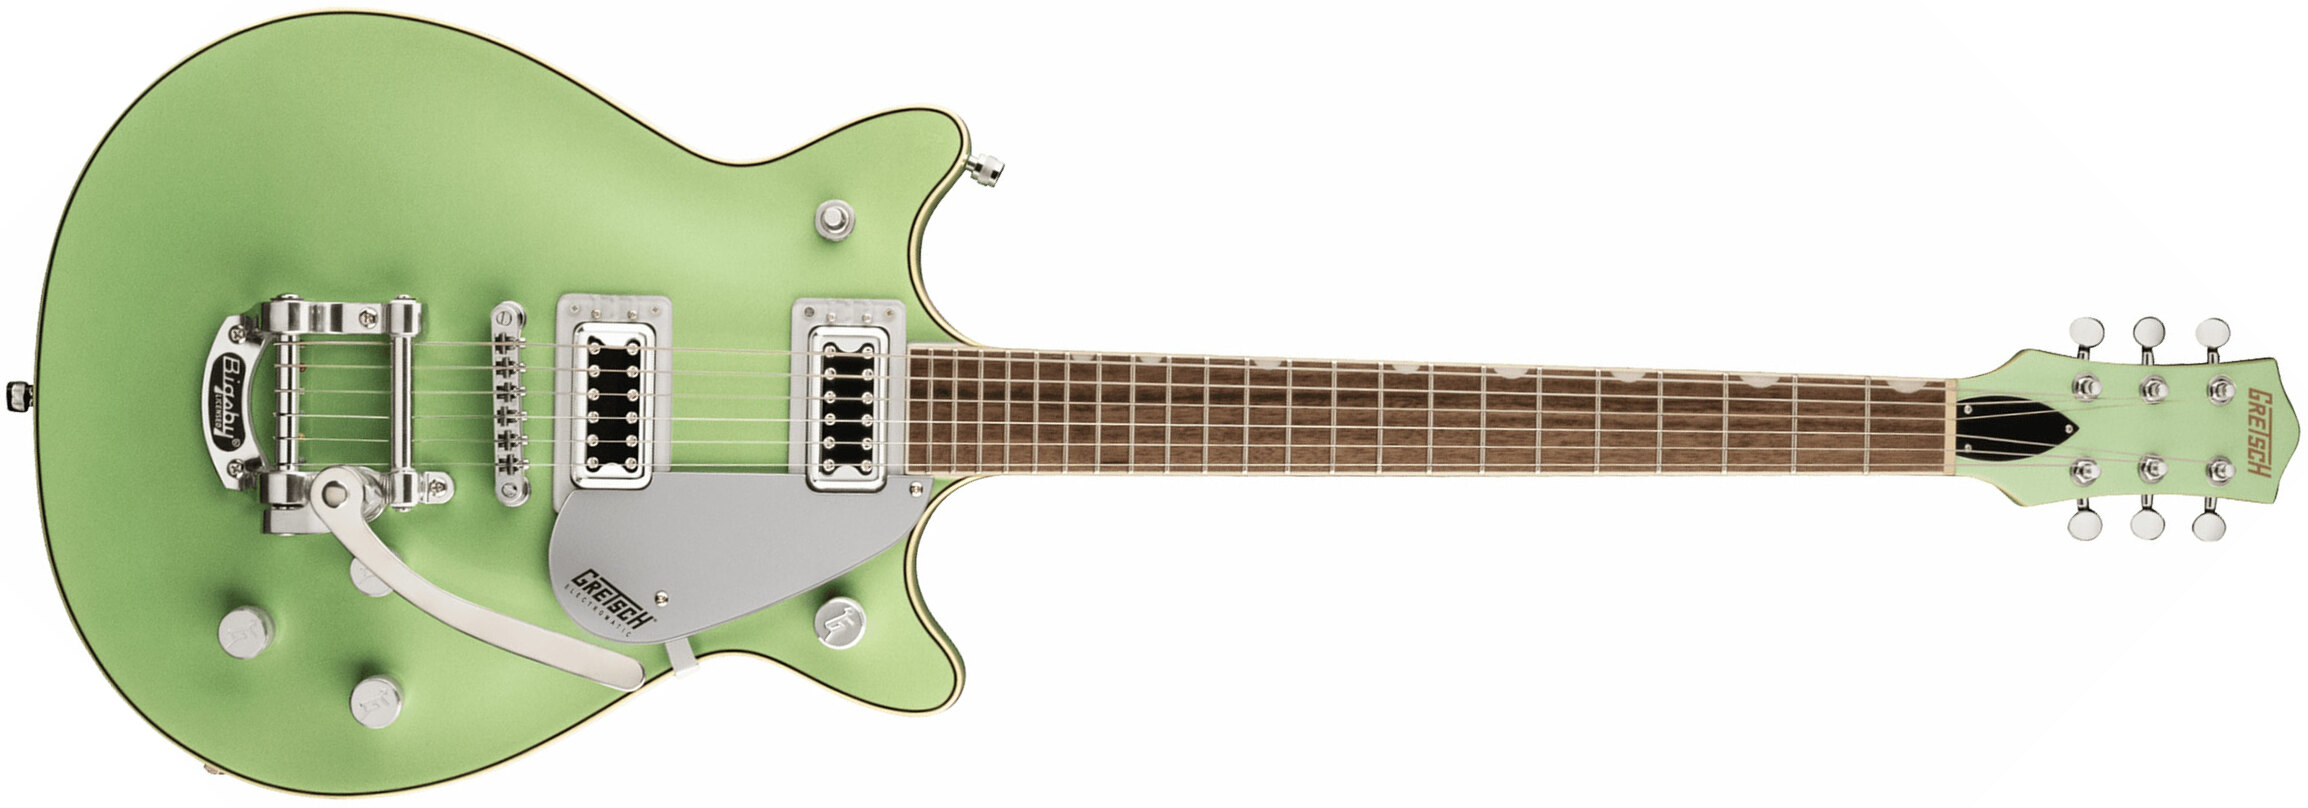 Gretsch G5232t Electromatic Double Jet Ft Hh Bigsby Lau - Broadway Jade - Double Cut E-Gitarre - Main picture